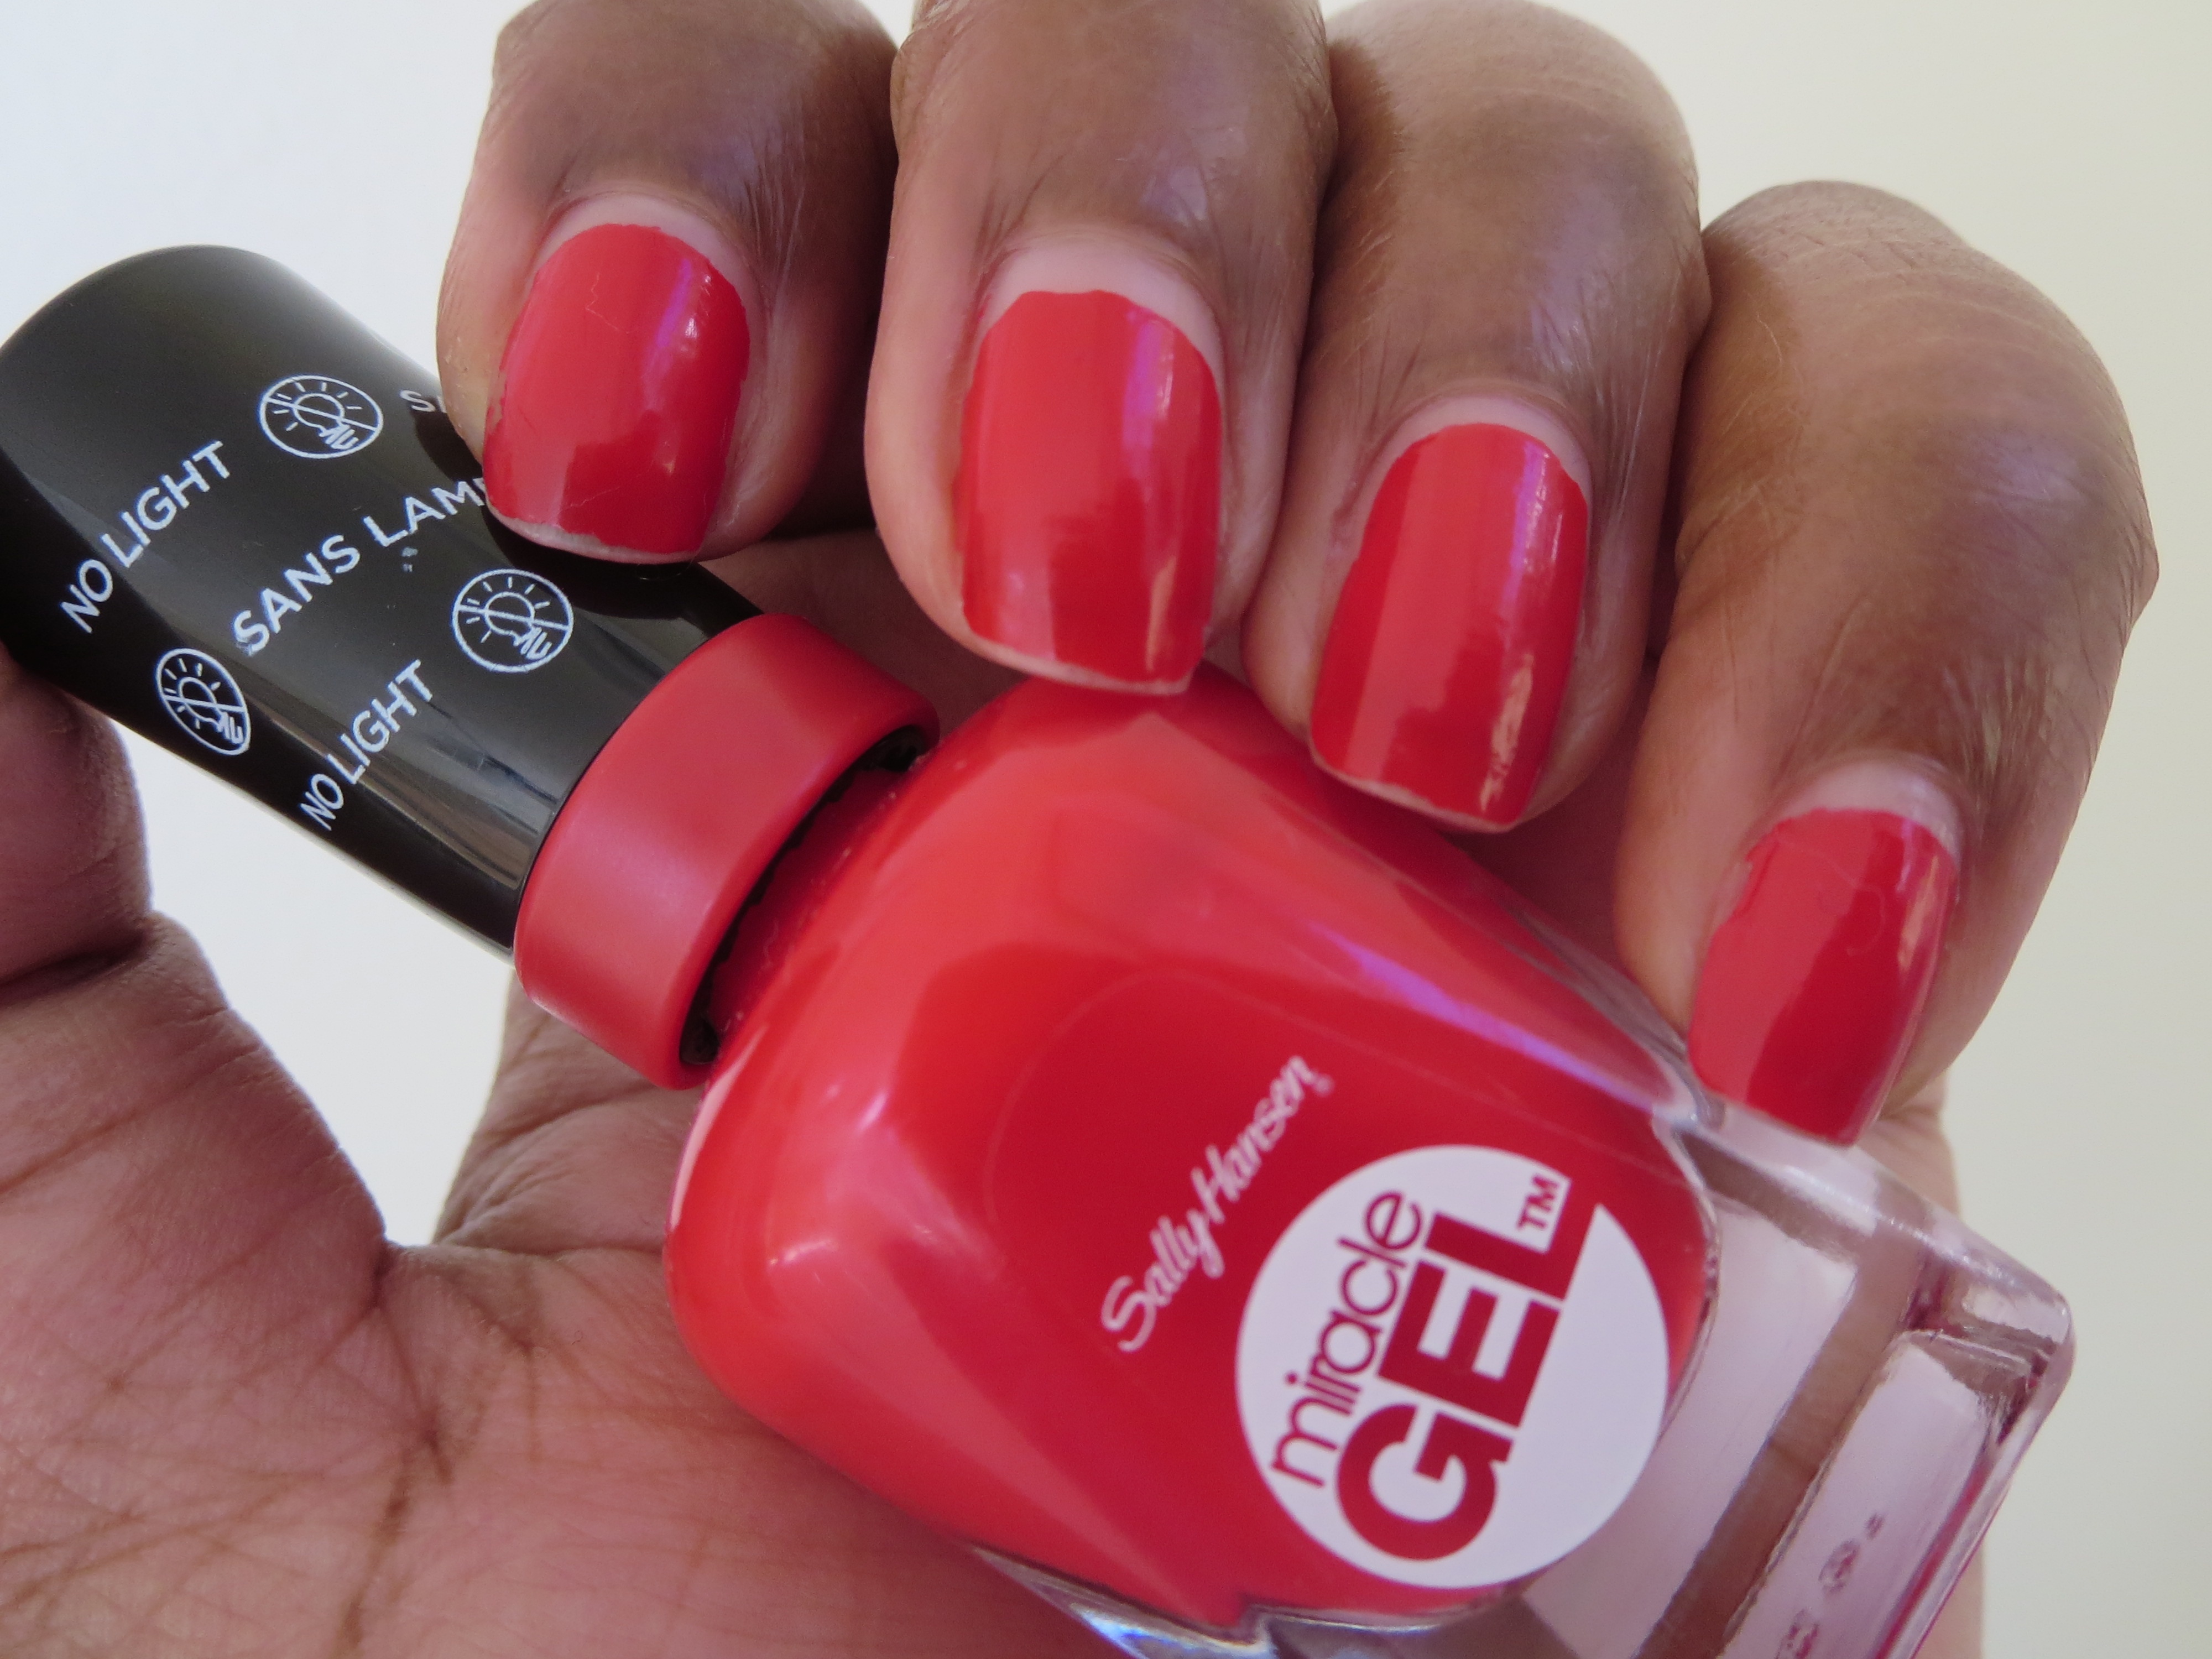 Sally Miracle Gel-Red Eye The Top Coat After 14